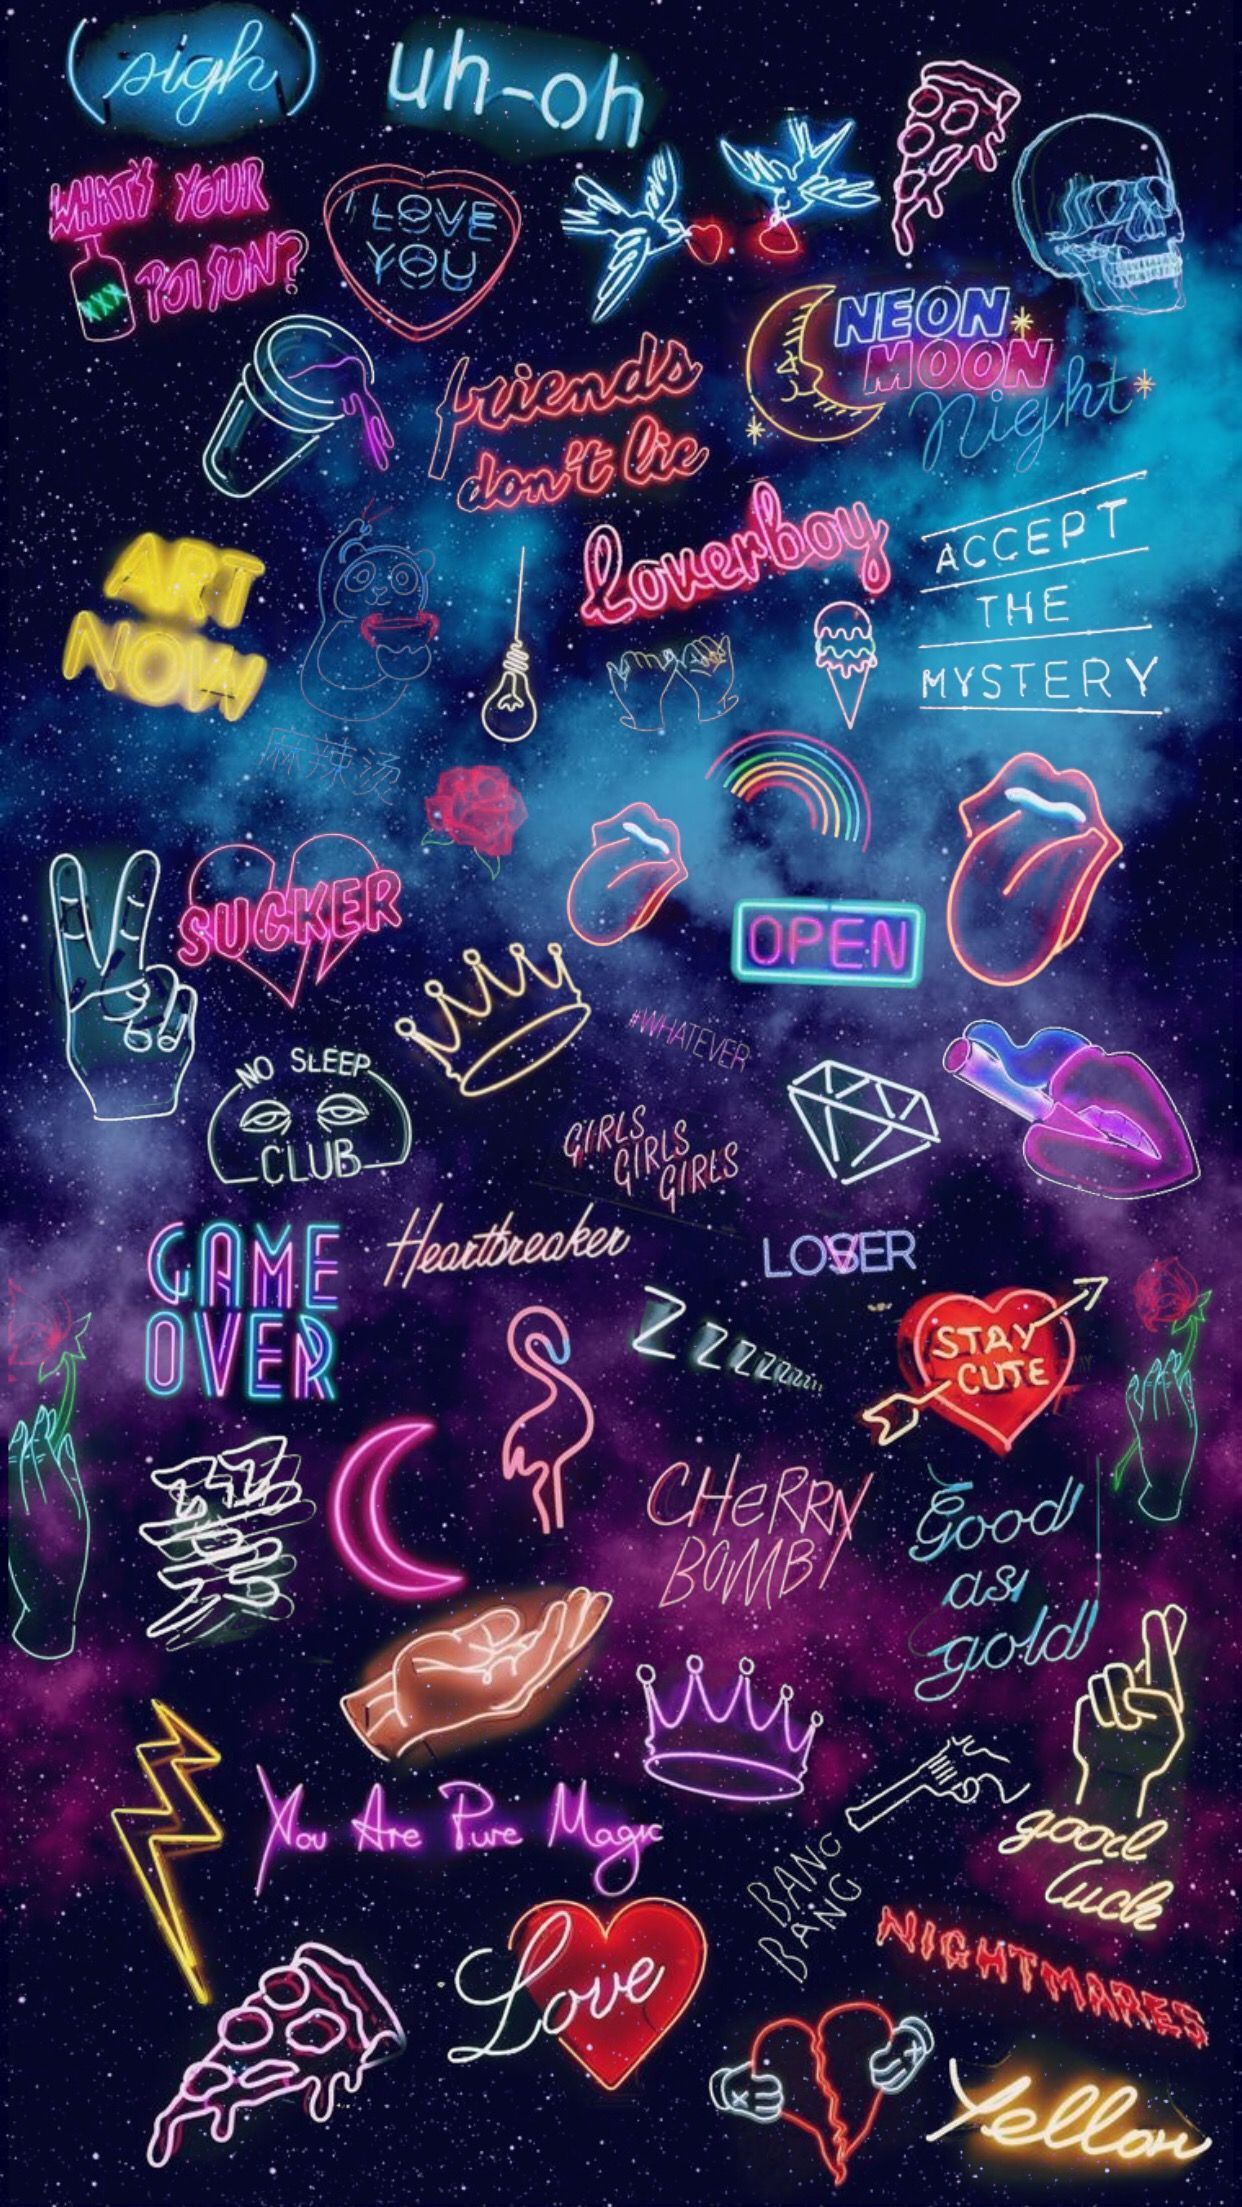 Aesthetic neon wallpaper for phone background. - Arcade, gaming, cool